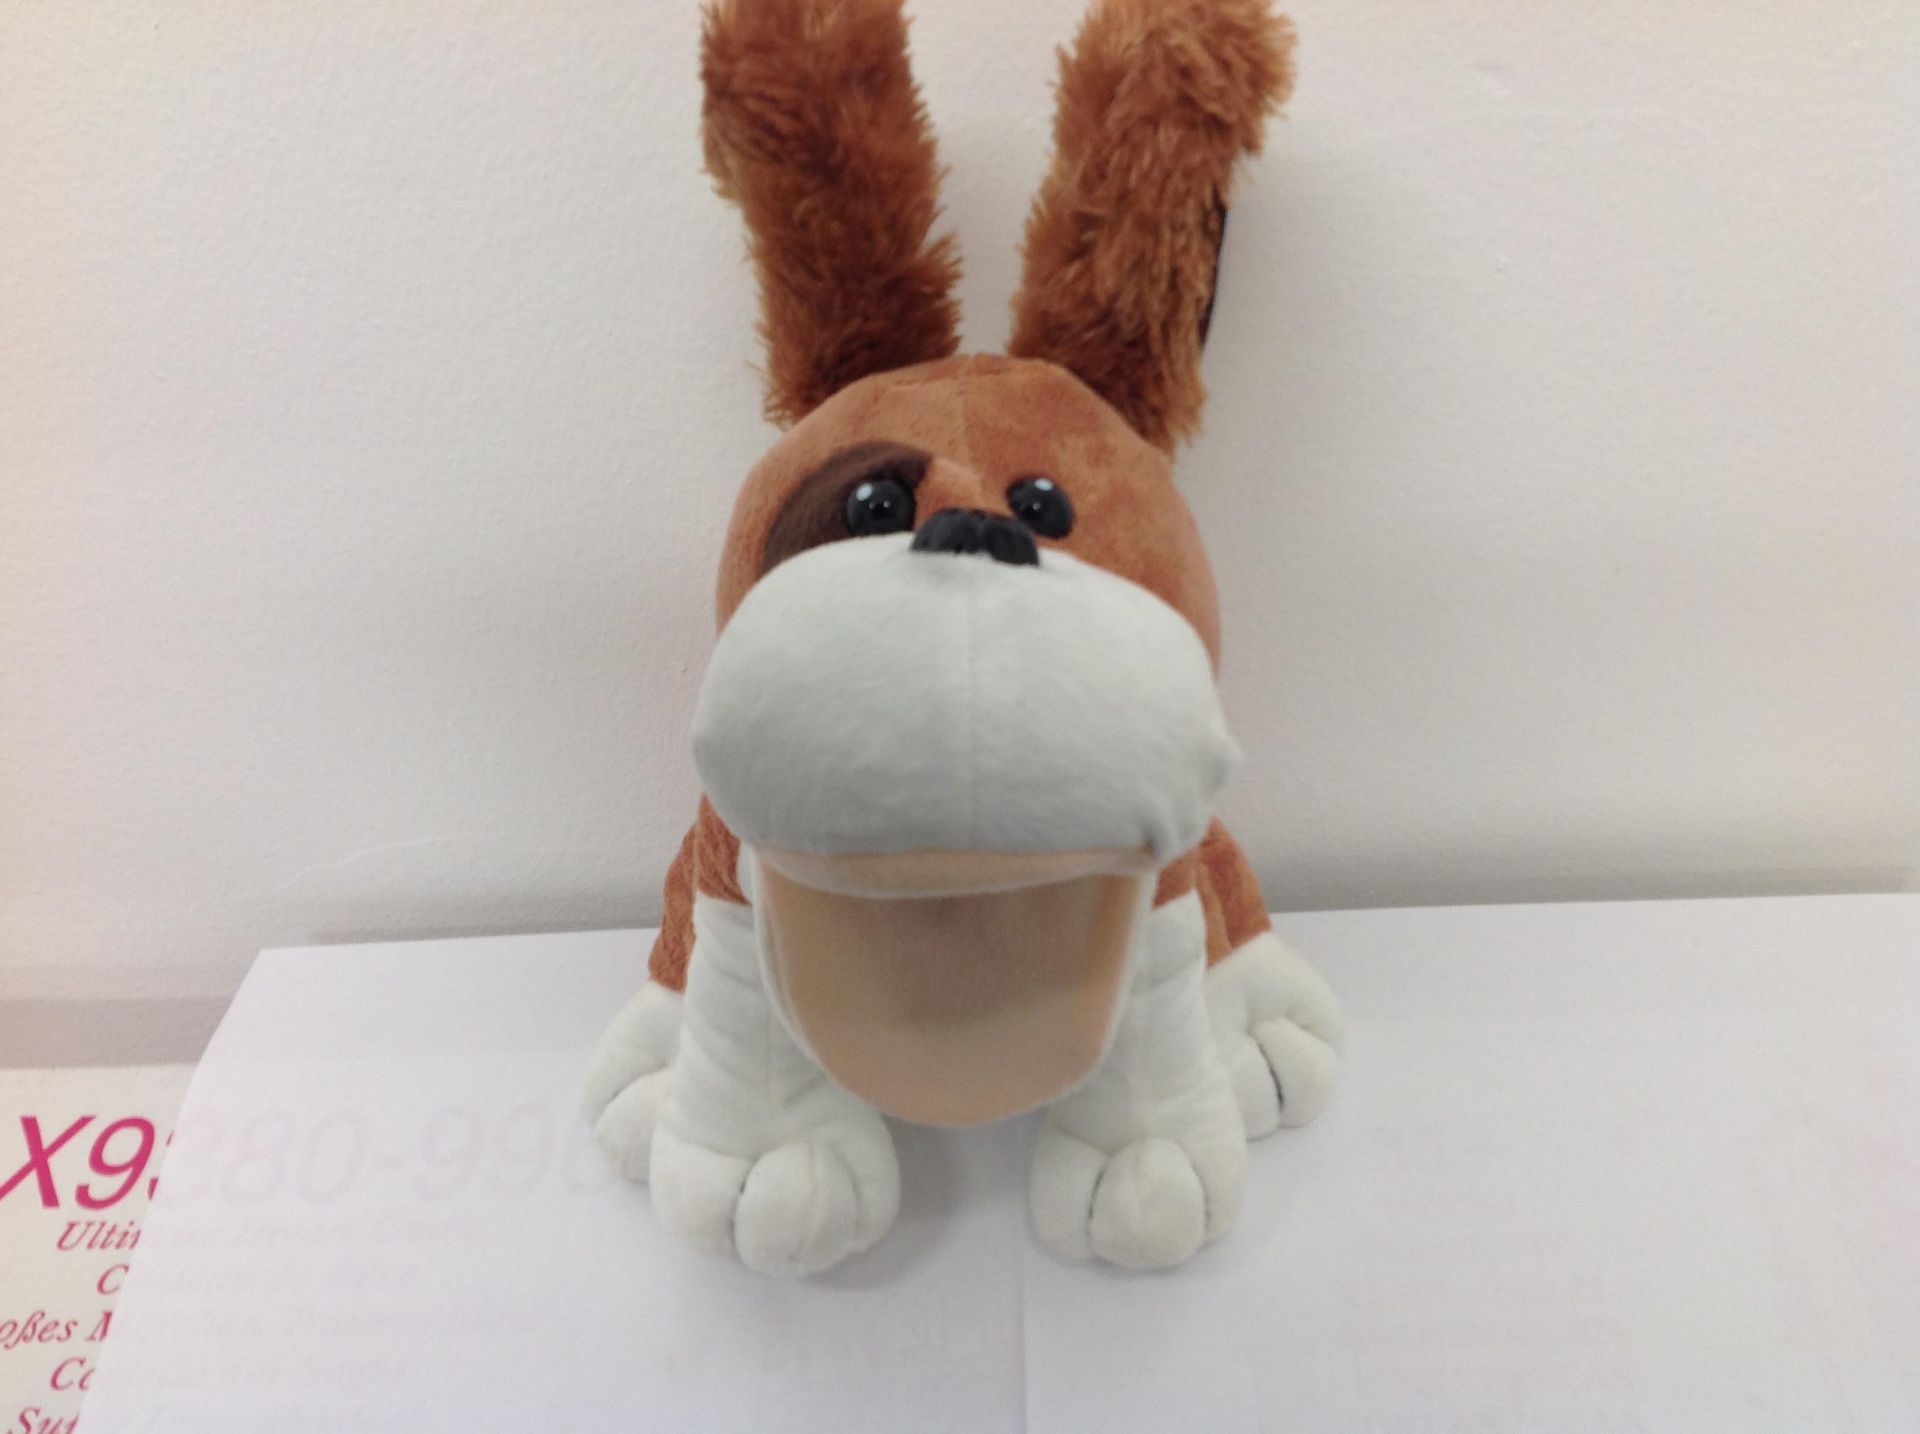 20 x Brite Power Talking Large Dog Hand Puppet. Brand new stock. RRP £19.99 each